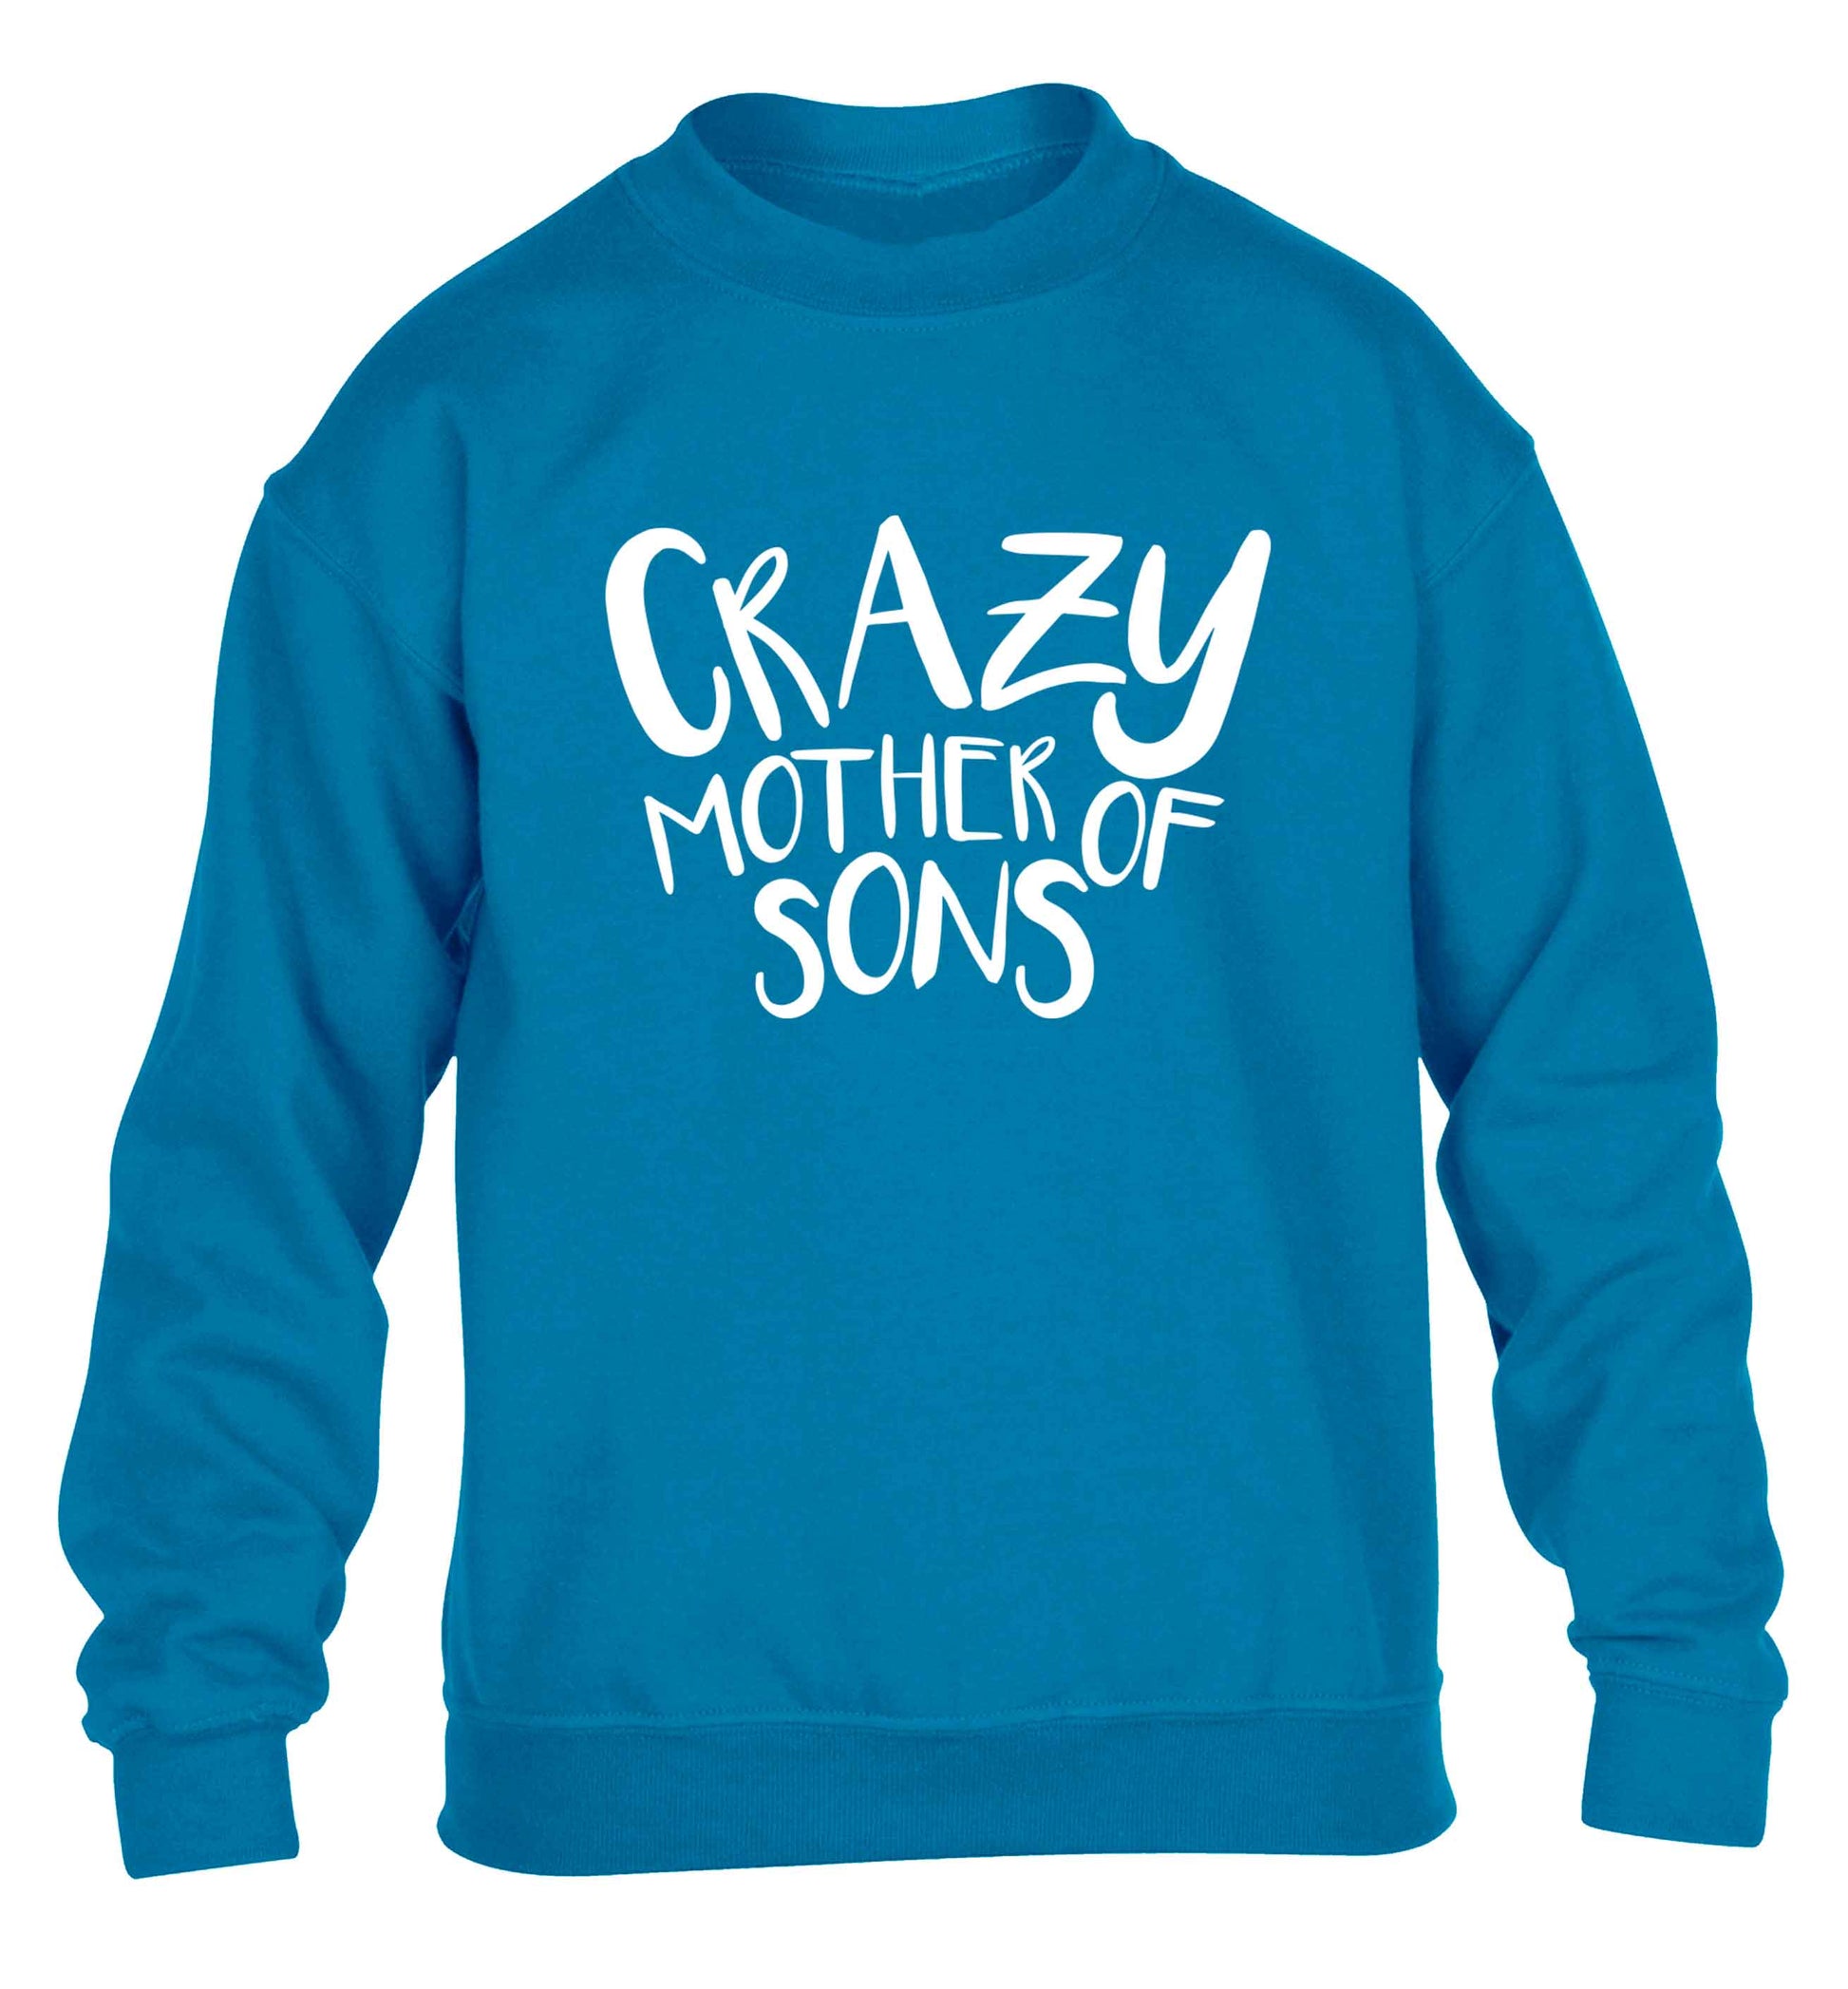 Crazy mother of sons children's blue sweater 12-13 Years